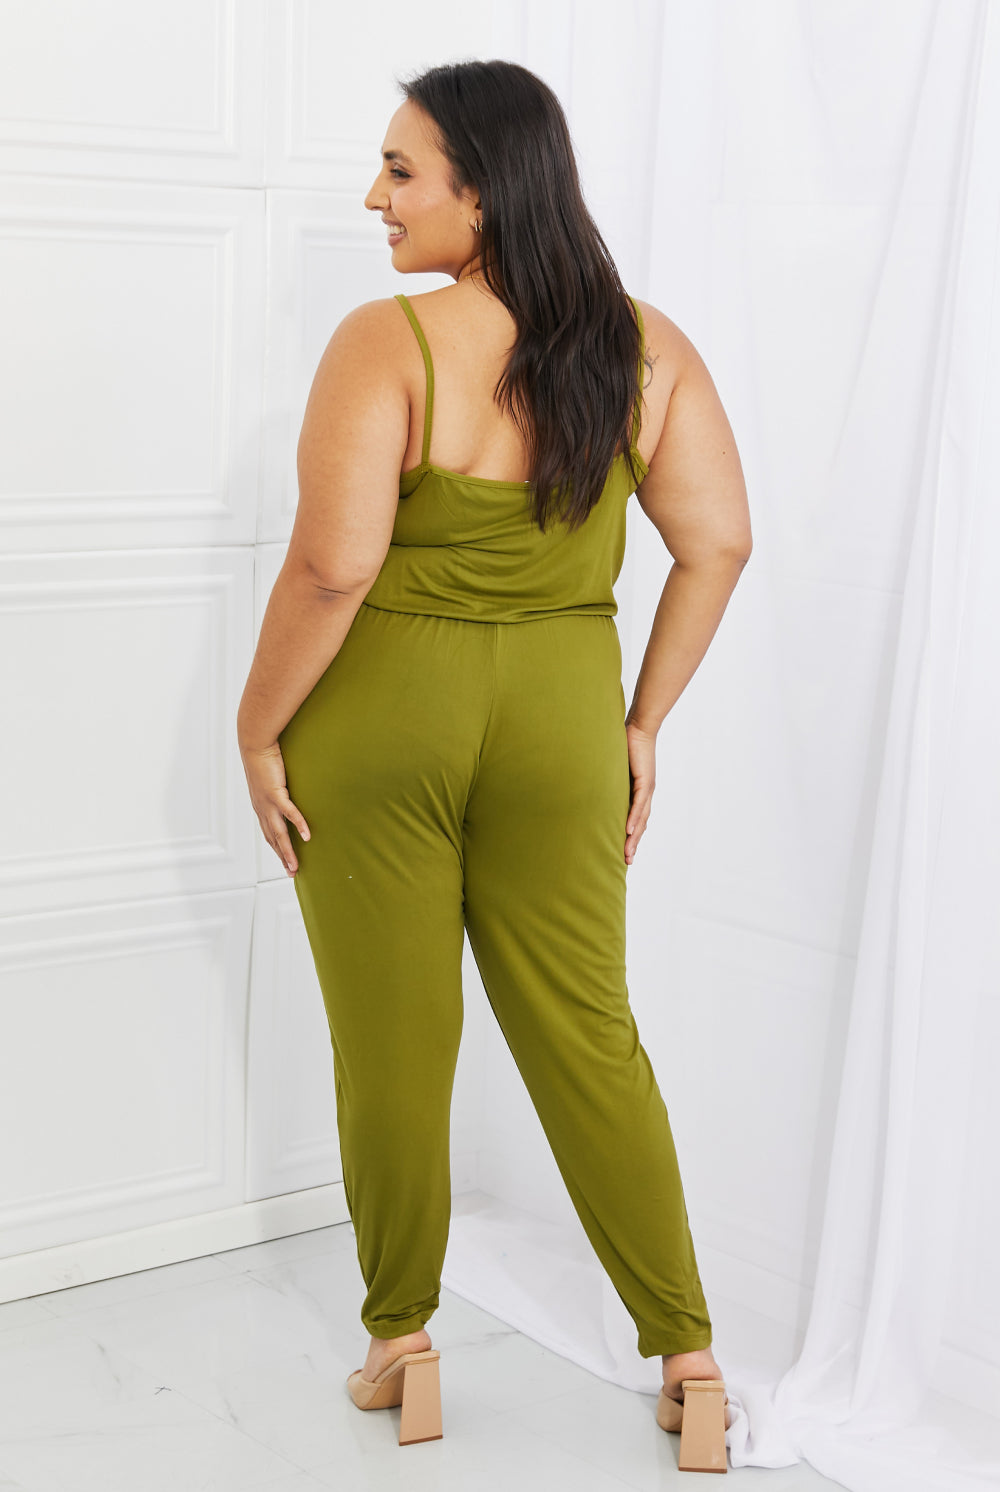 Light Gray Comfy Casual Full Size Solid Elastic Waistband Jumpsuit in Chartreuse Jumpsuits & Rompers